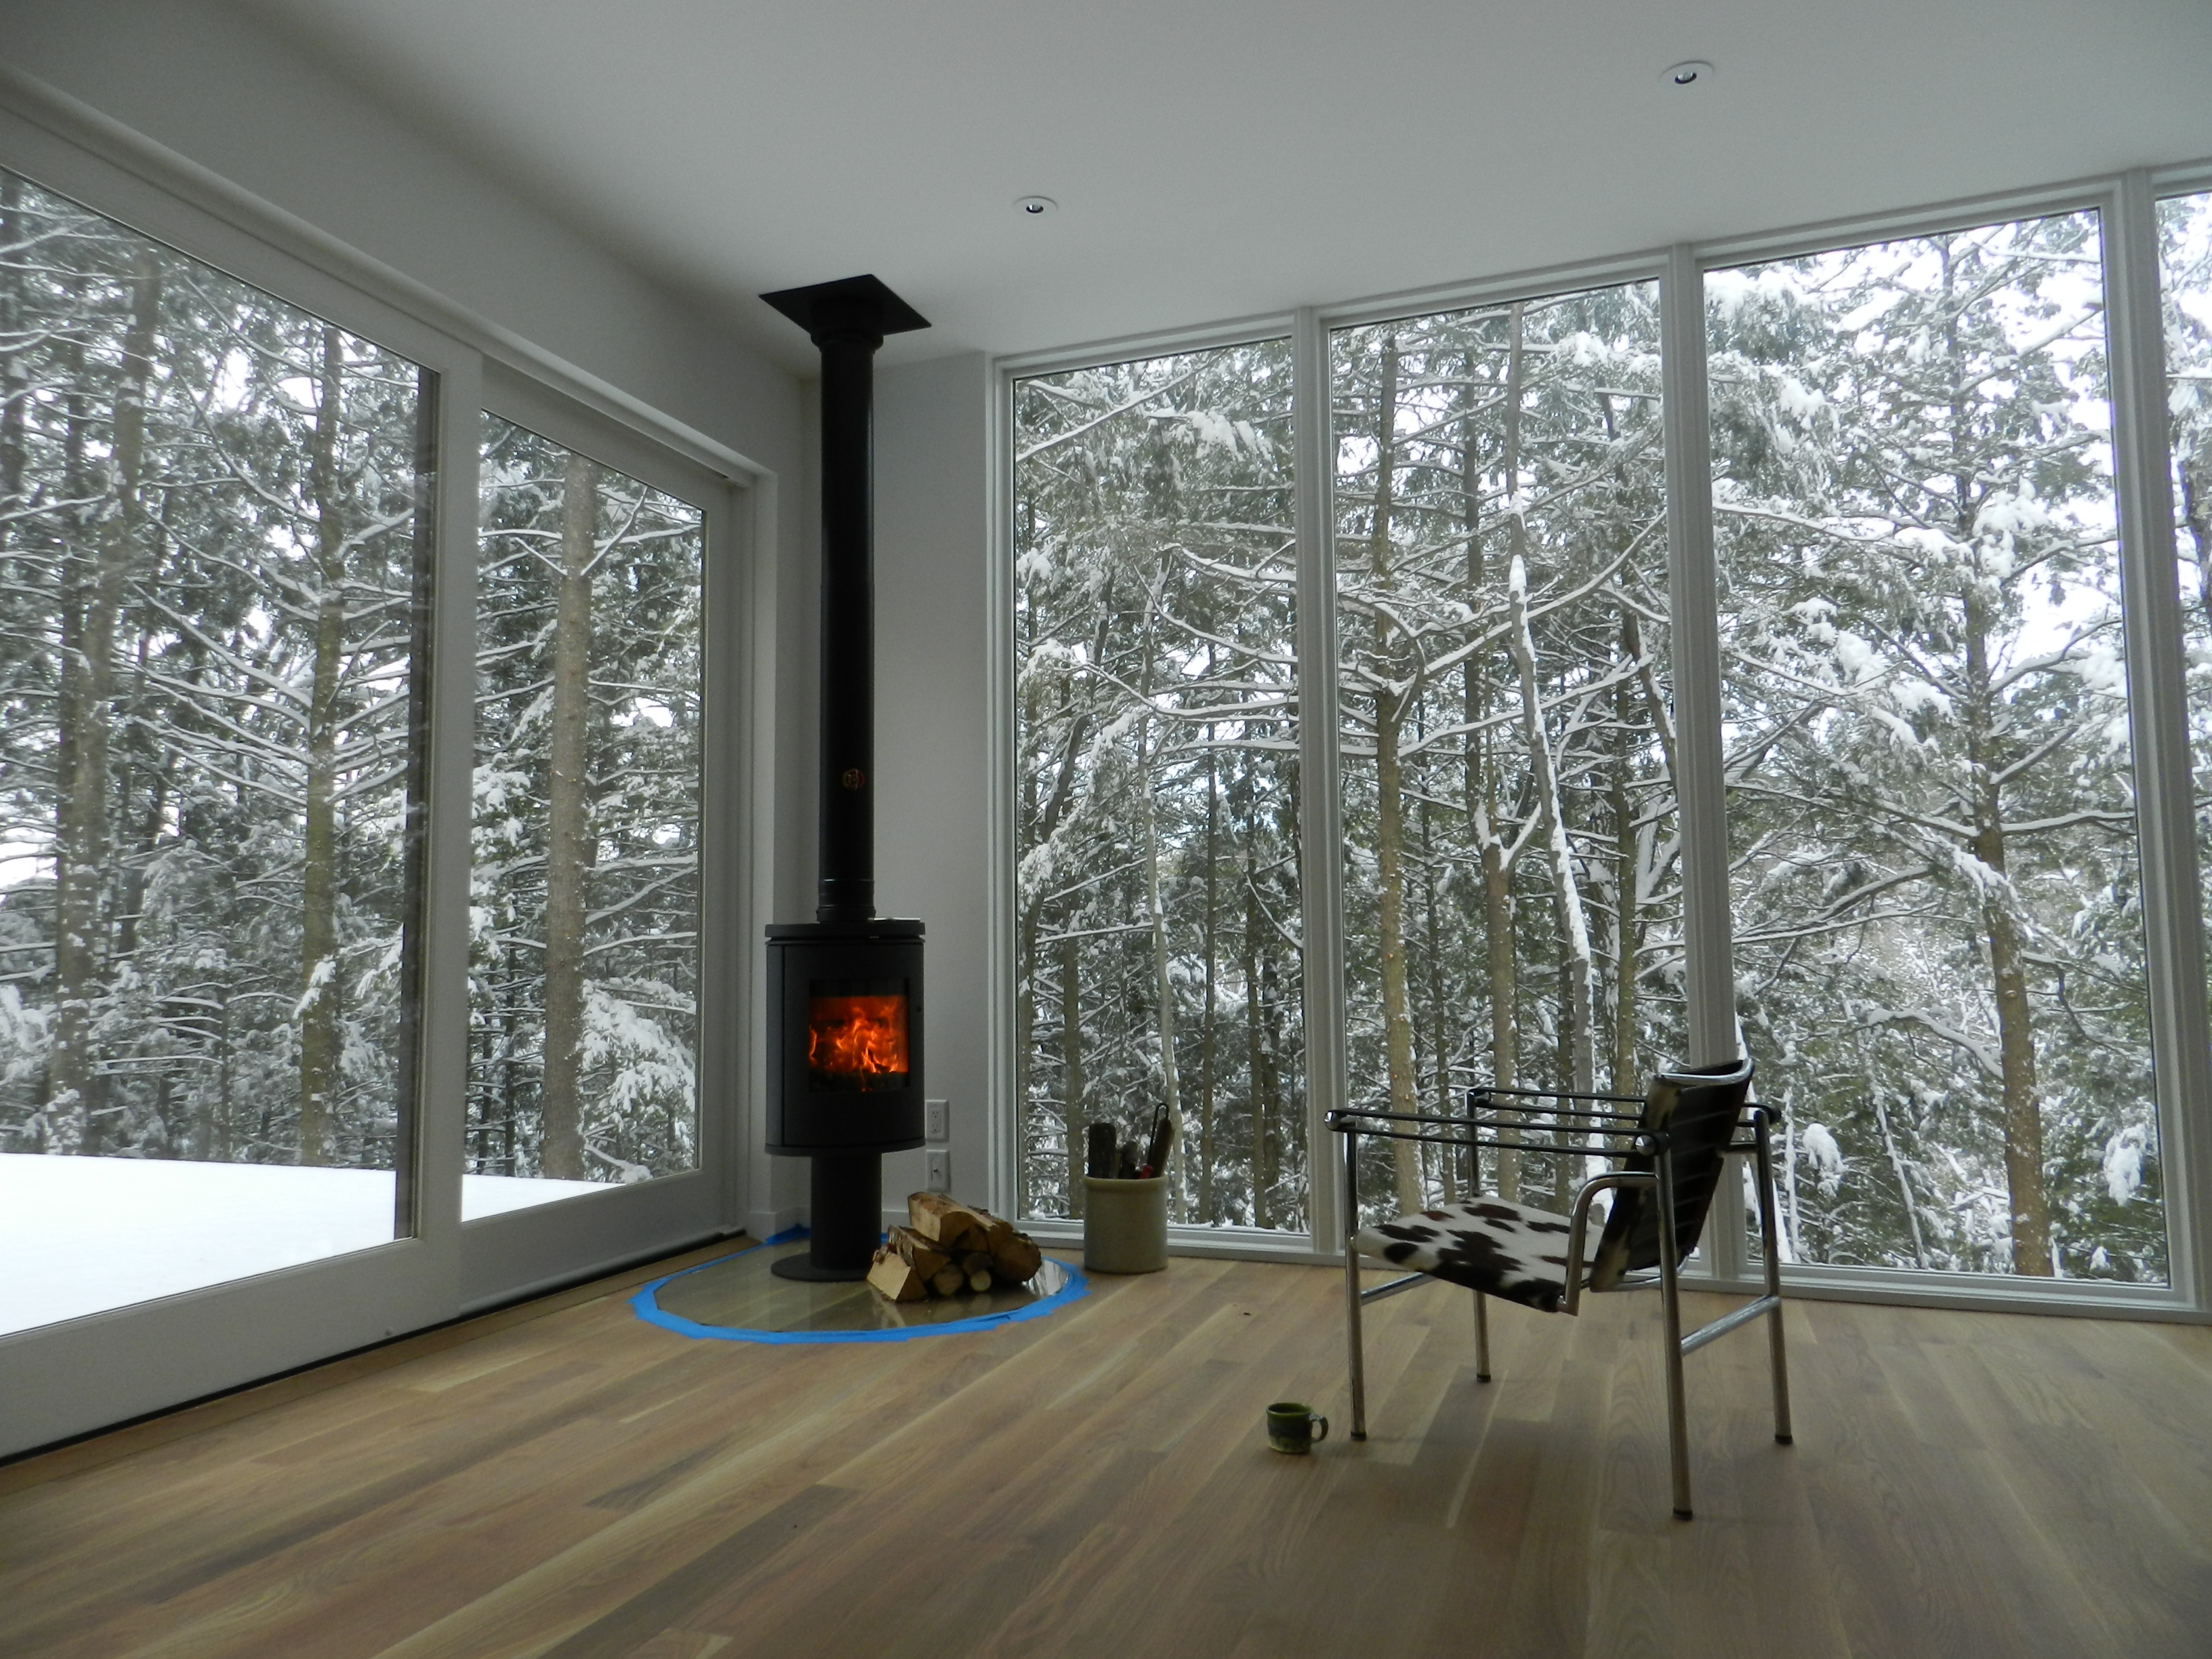 Creek House in Winter - Modern House in the Woods